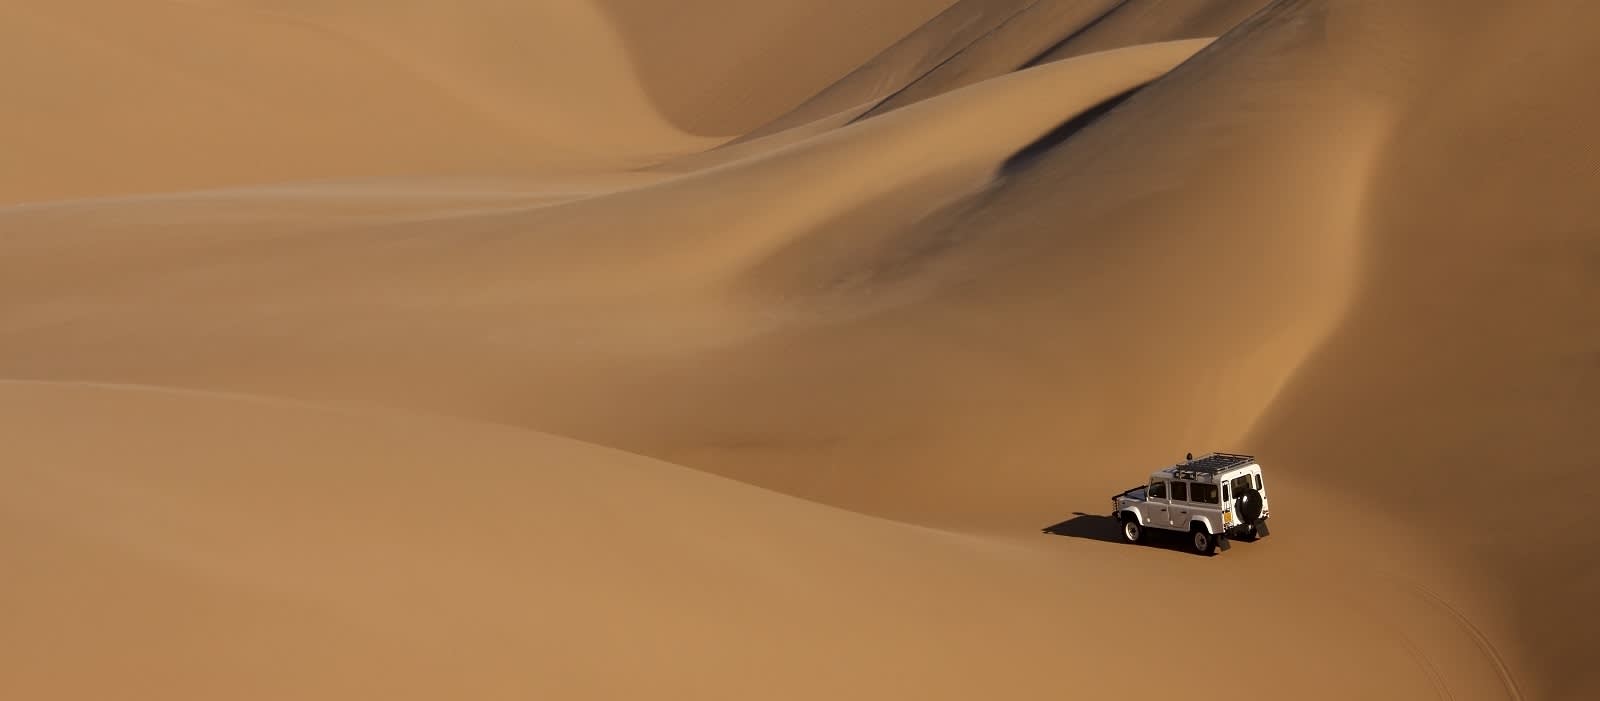 Enchanting Travels The Sand Dunes of the Namib Desert in Namibia